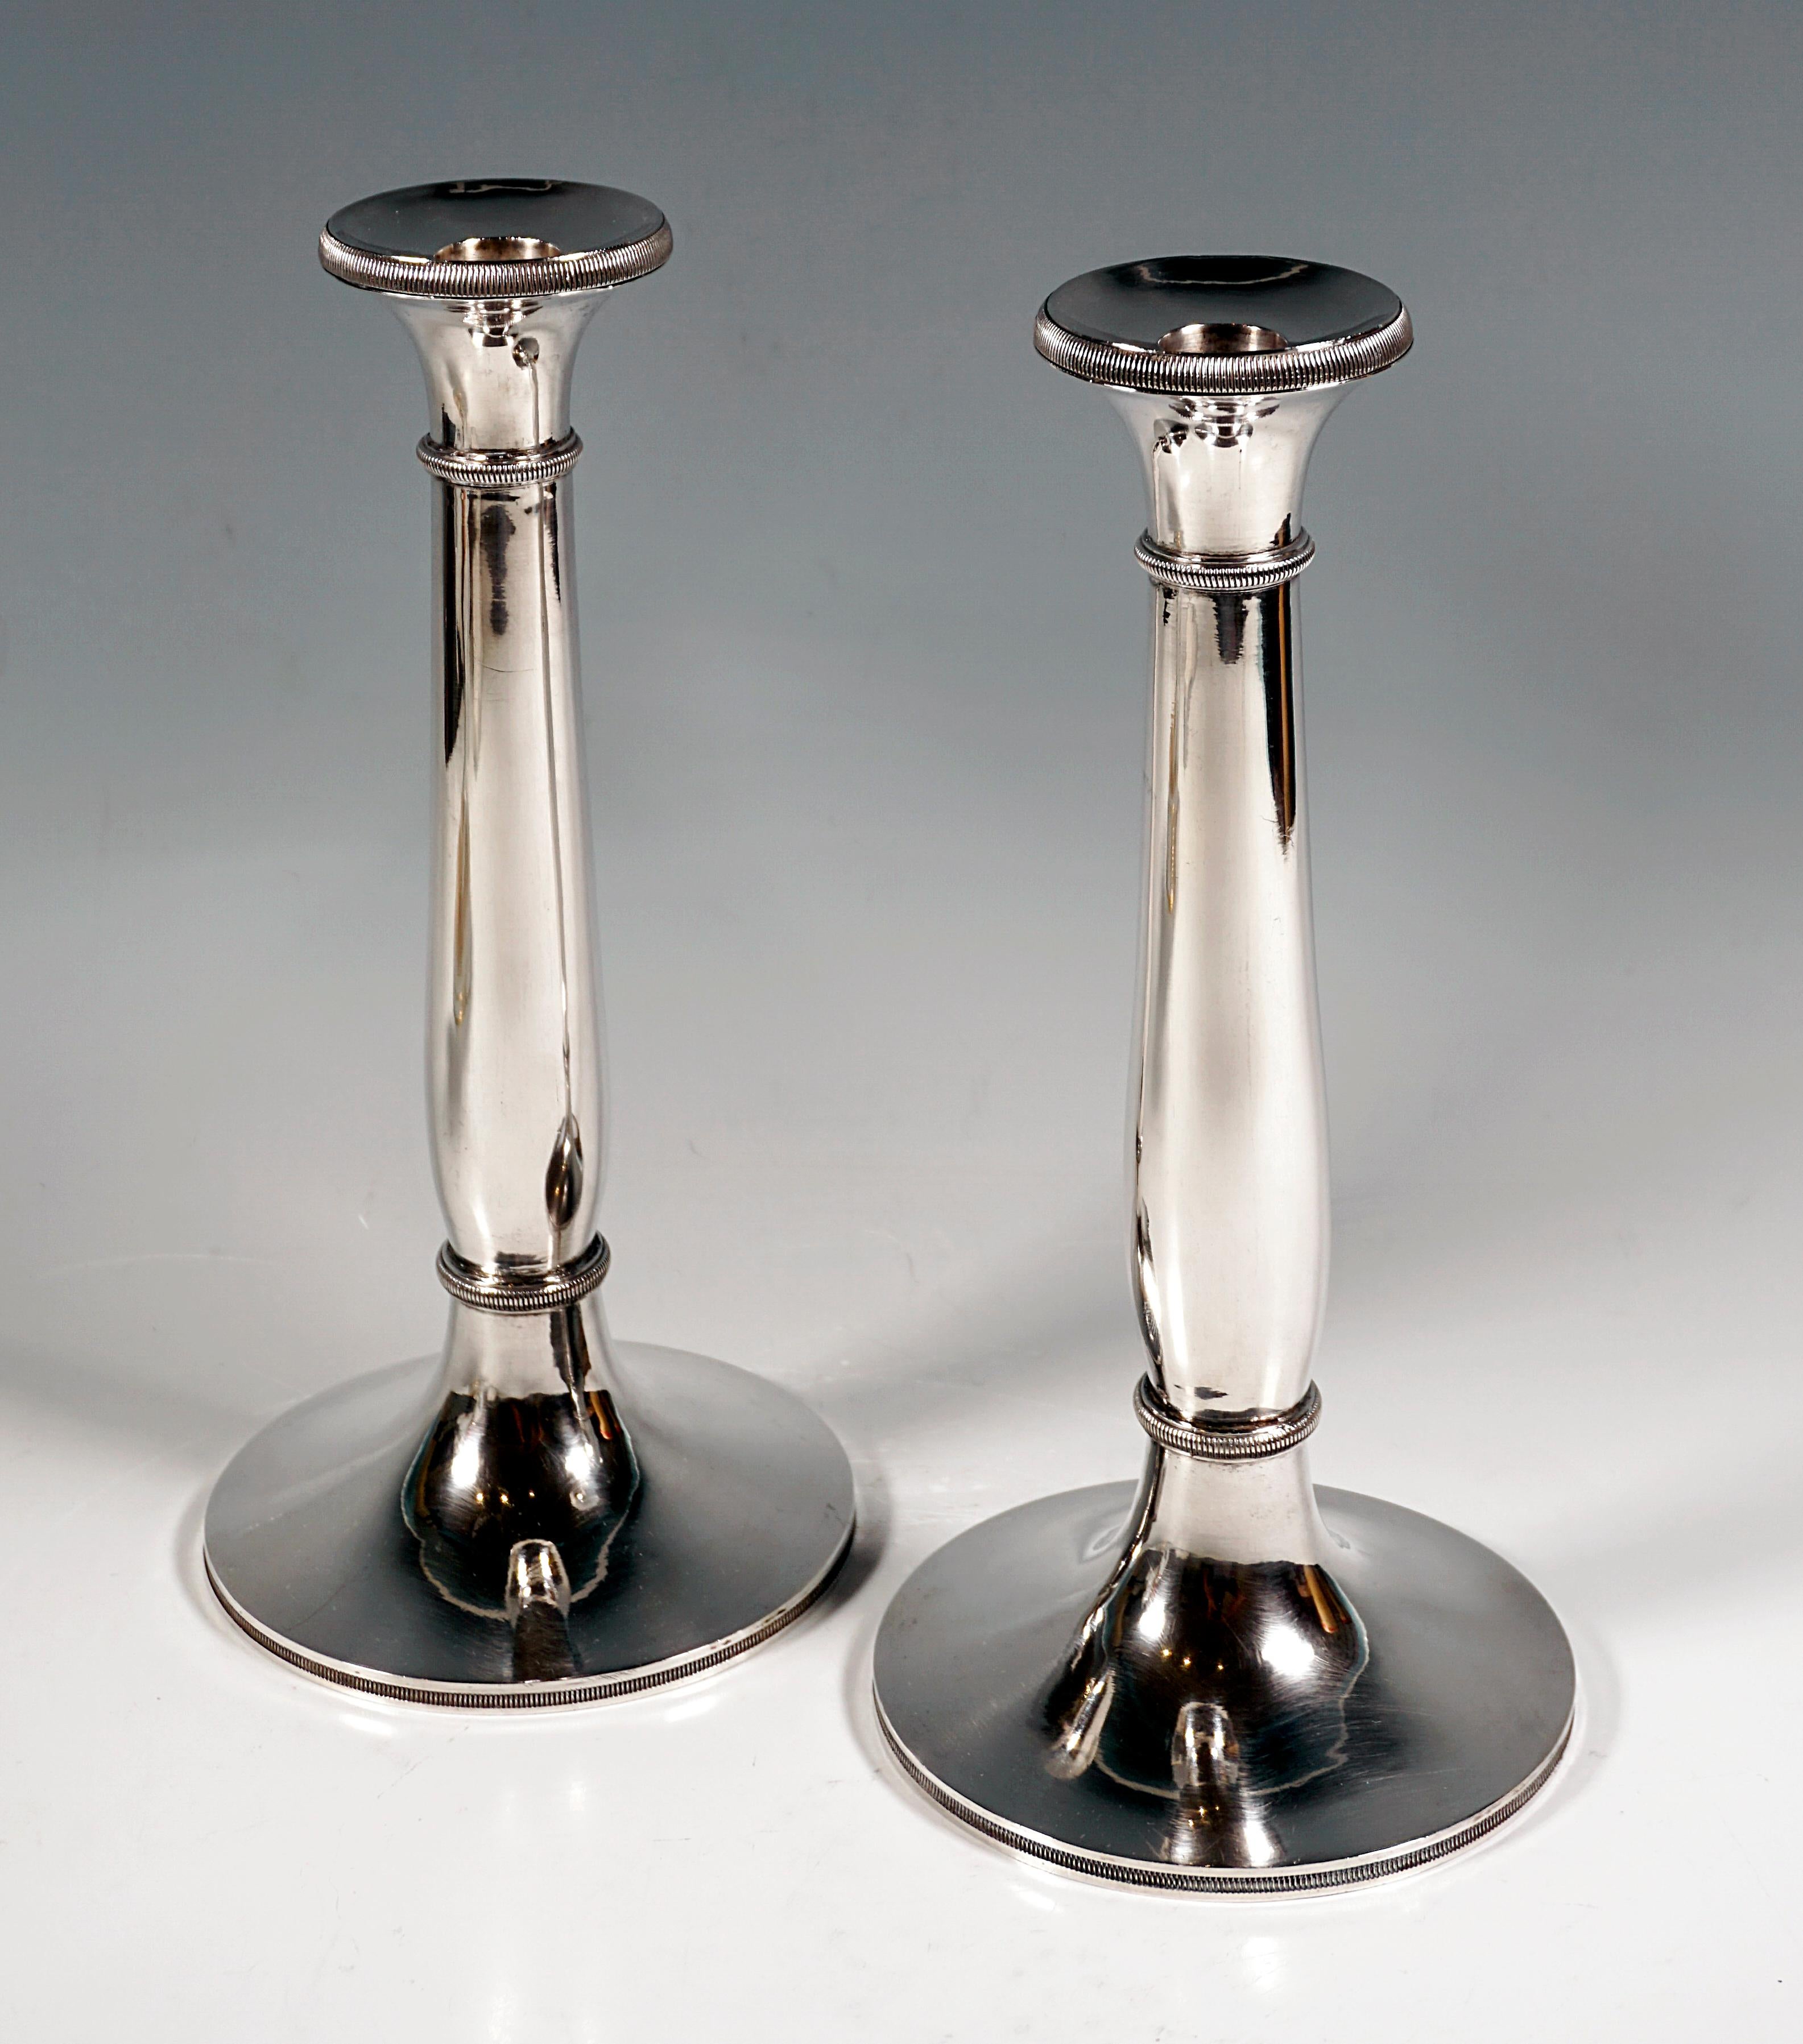 Two elegant, simple early Biedermeier silver candle holders on a round stand with a slightly curved, smooth shaft, chased decoration on the edge of the foot, on the narrow bulge rings and on the upper edge of the slightly flared vase-shaped